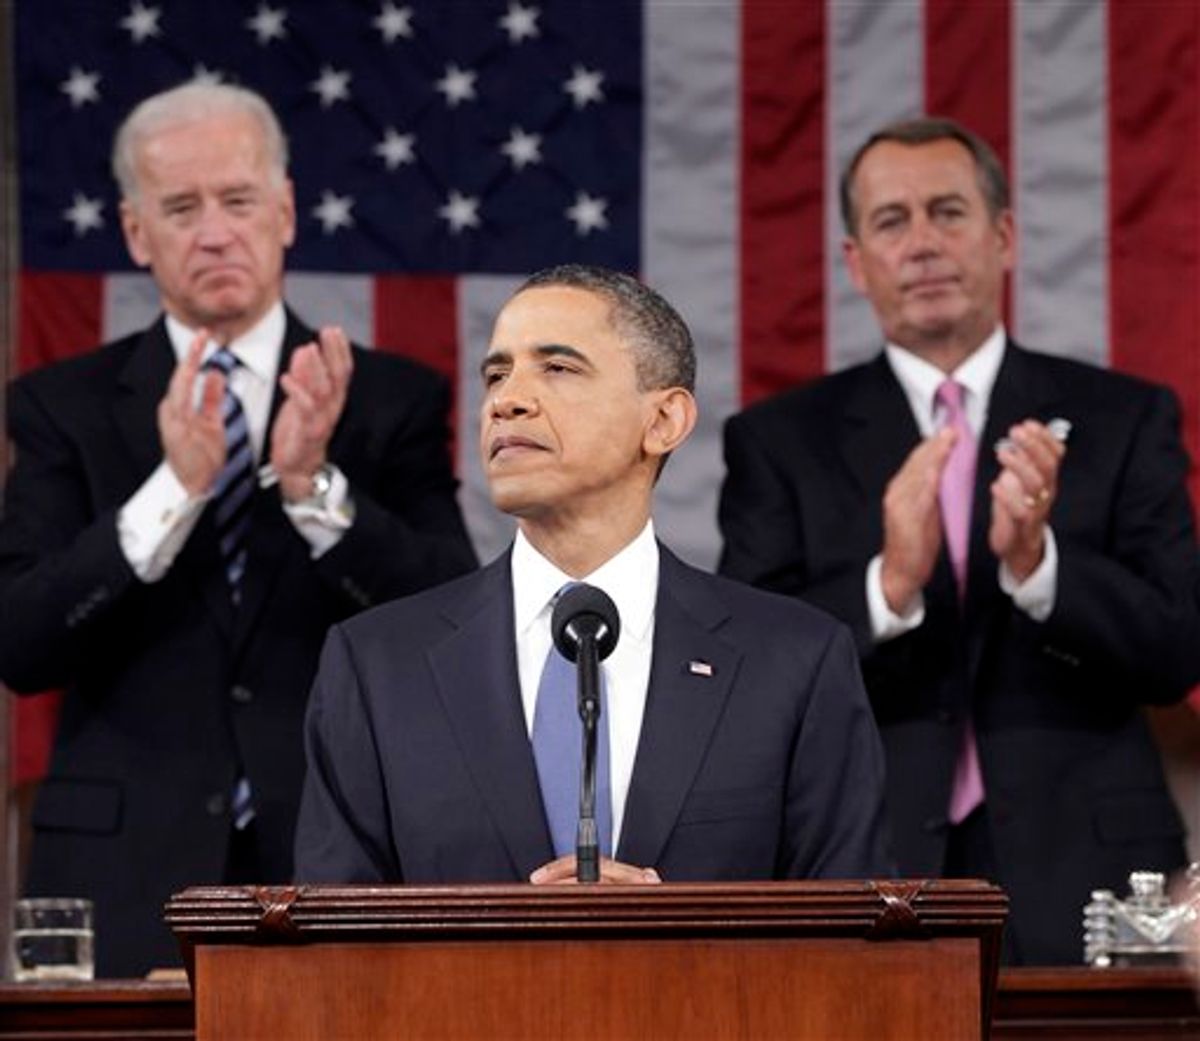 President Barack Obama is applauded by Vice President Joe Biden and House Speaker John Boehner on Capitol Hill in Washington, Tuesday, Jan. 25, 2011, while delivering his State of the Union address  (AP Photo/Pablo Martinez Monsivais, Pool) (AP)